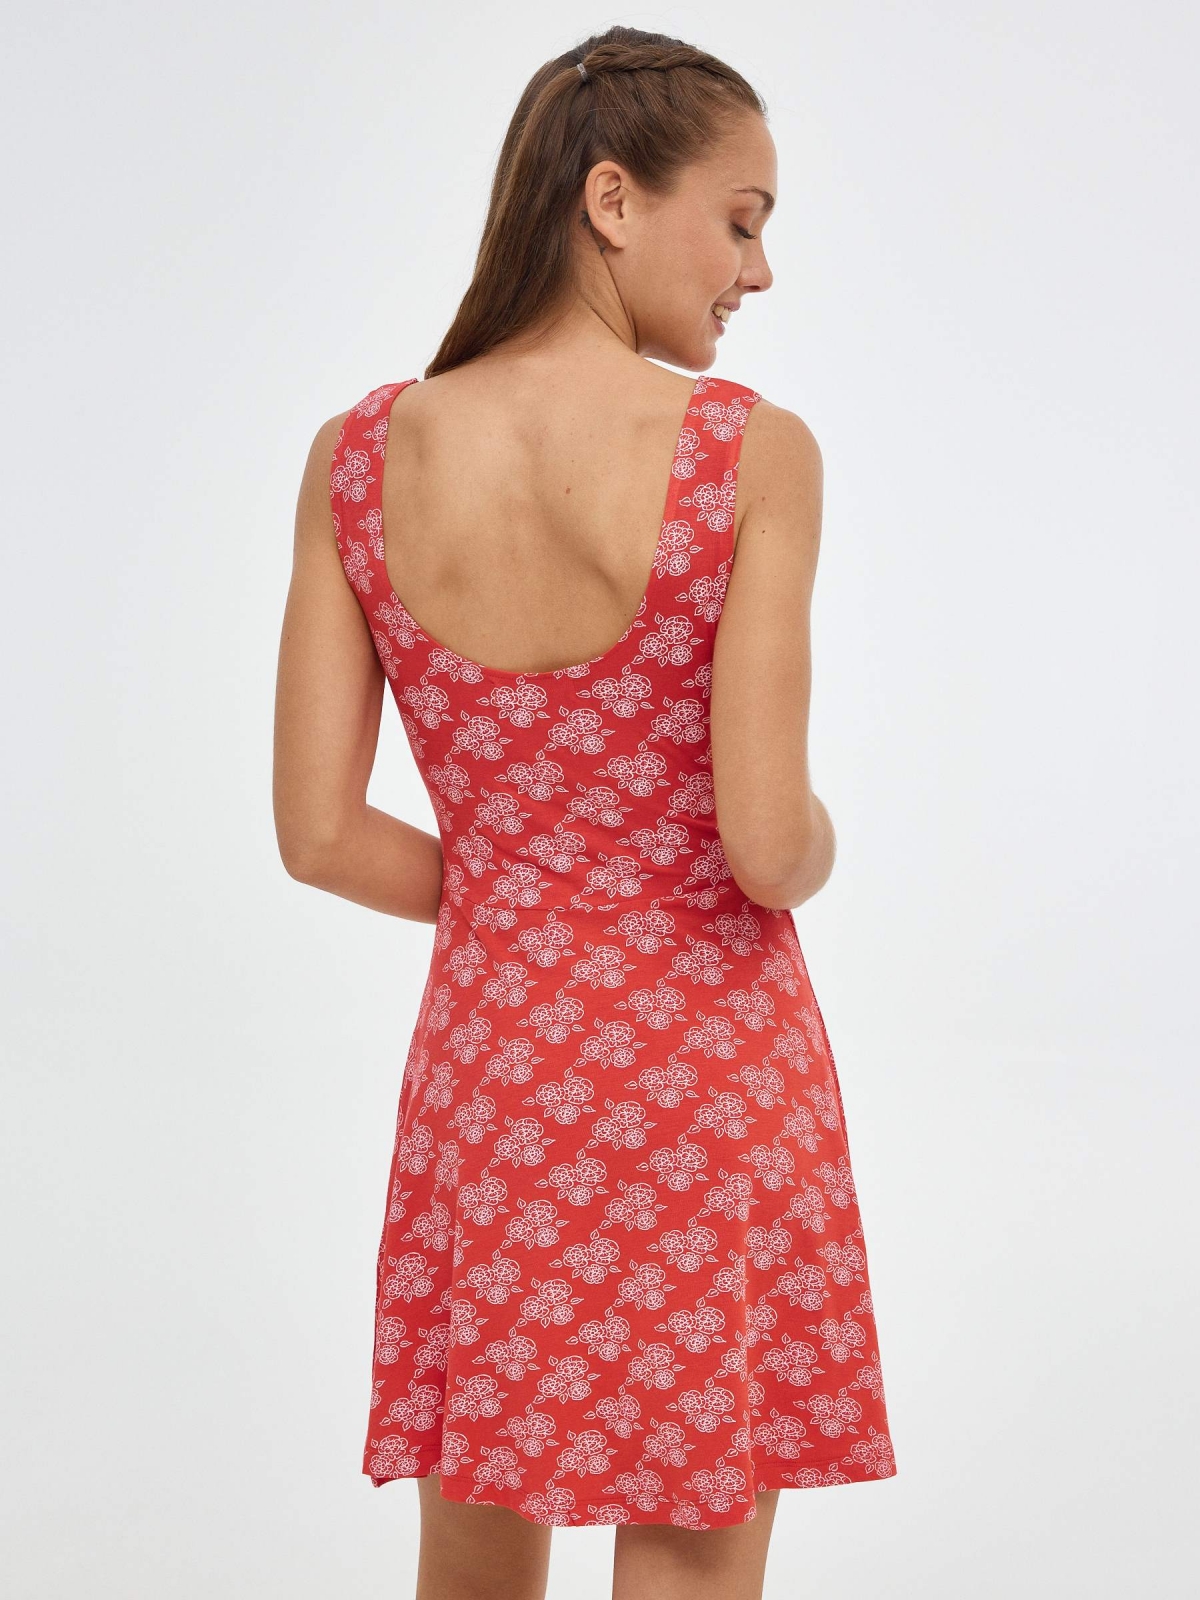 Floral print mini dress red middle back view